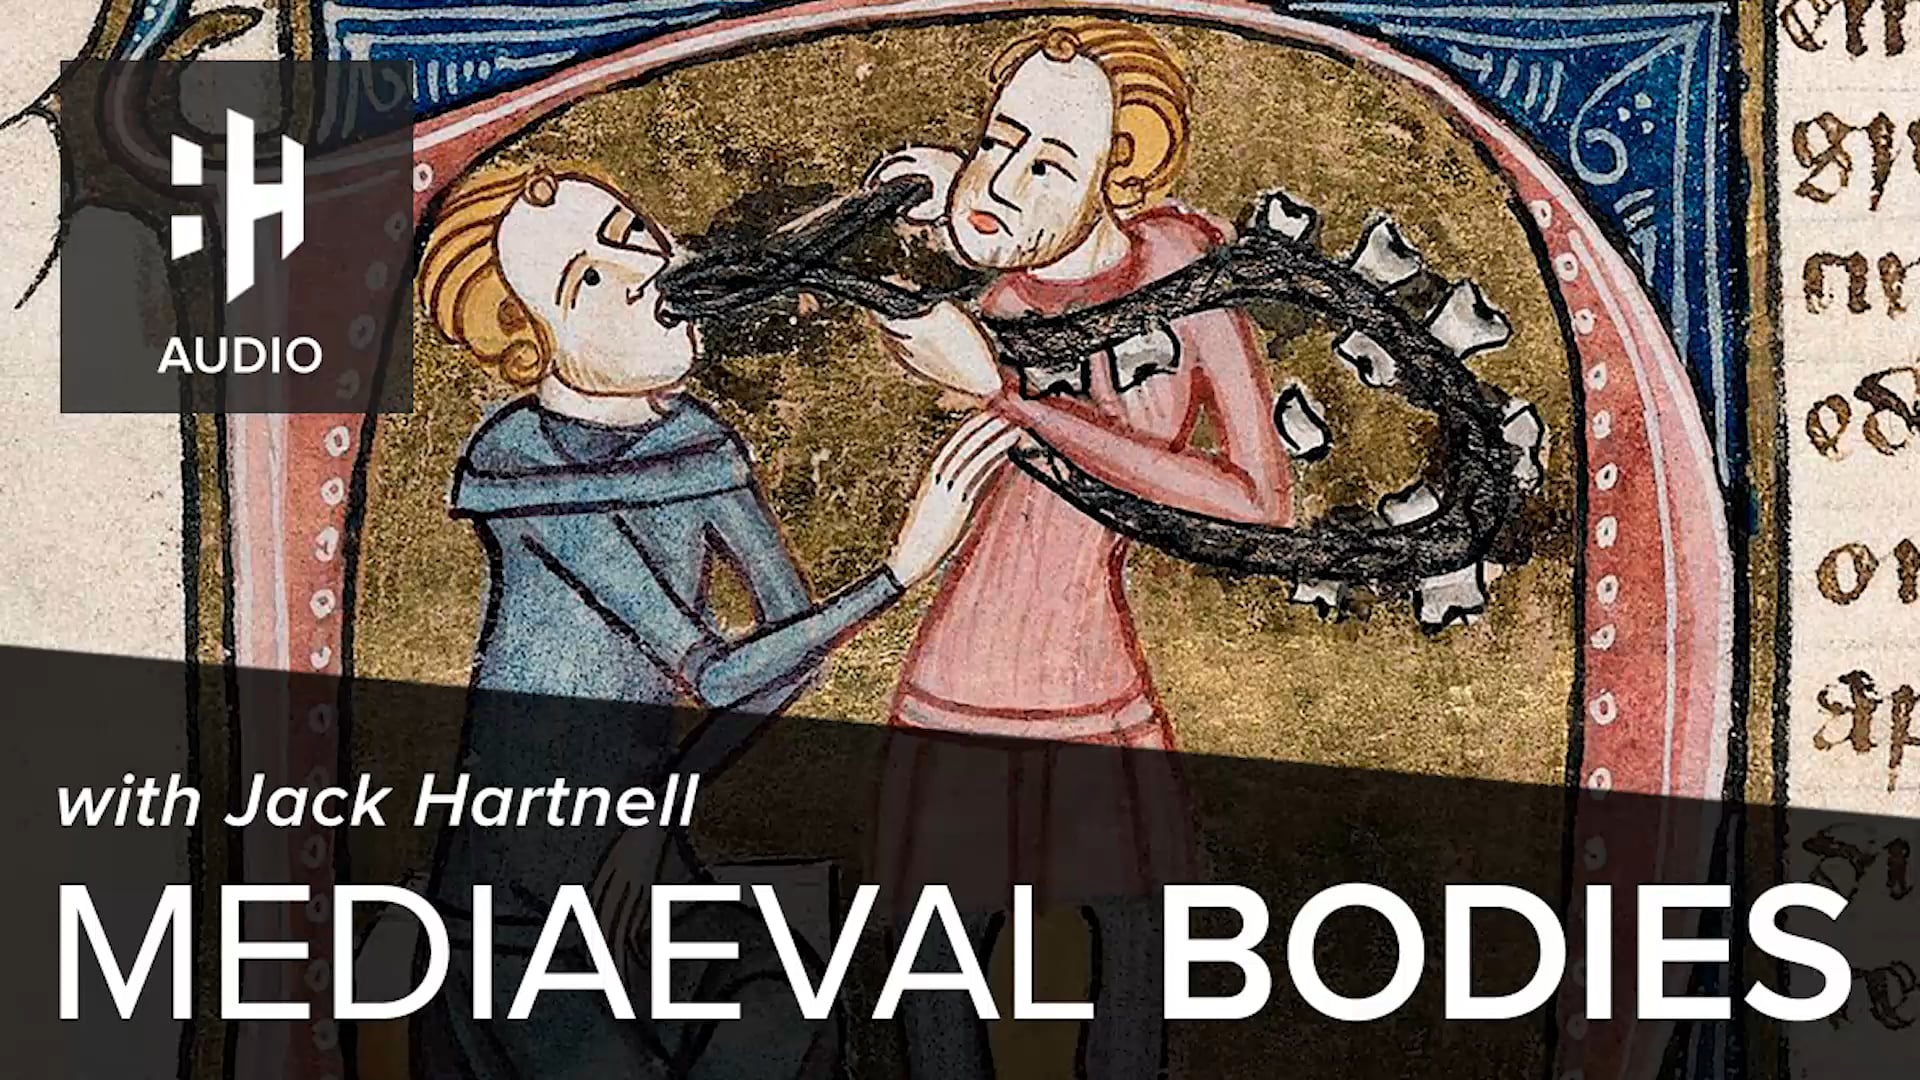 hartnell medieval bodies